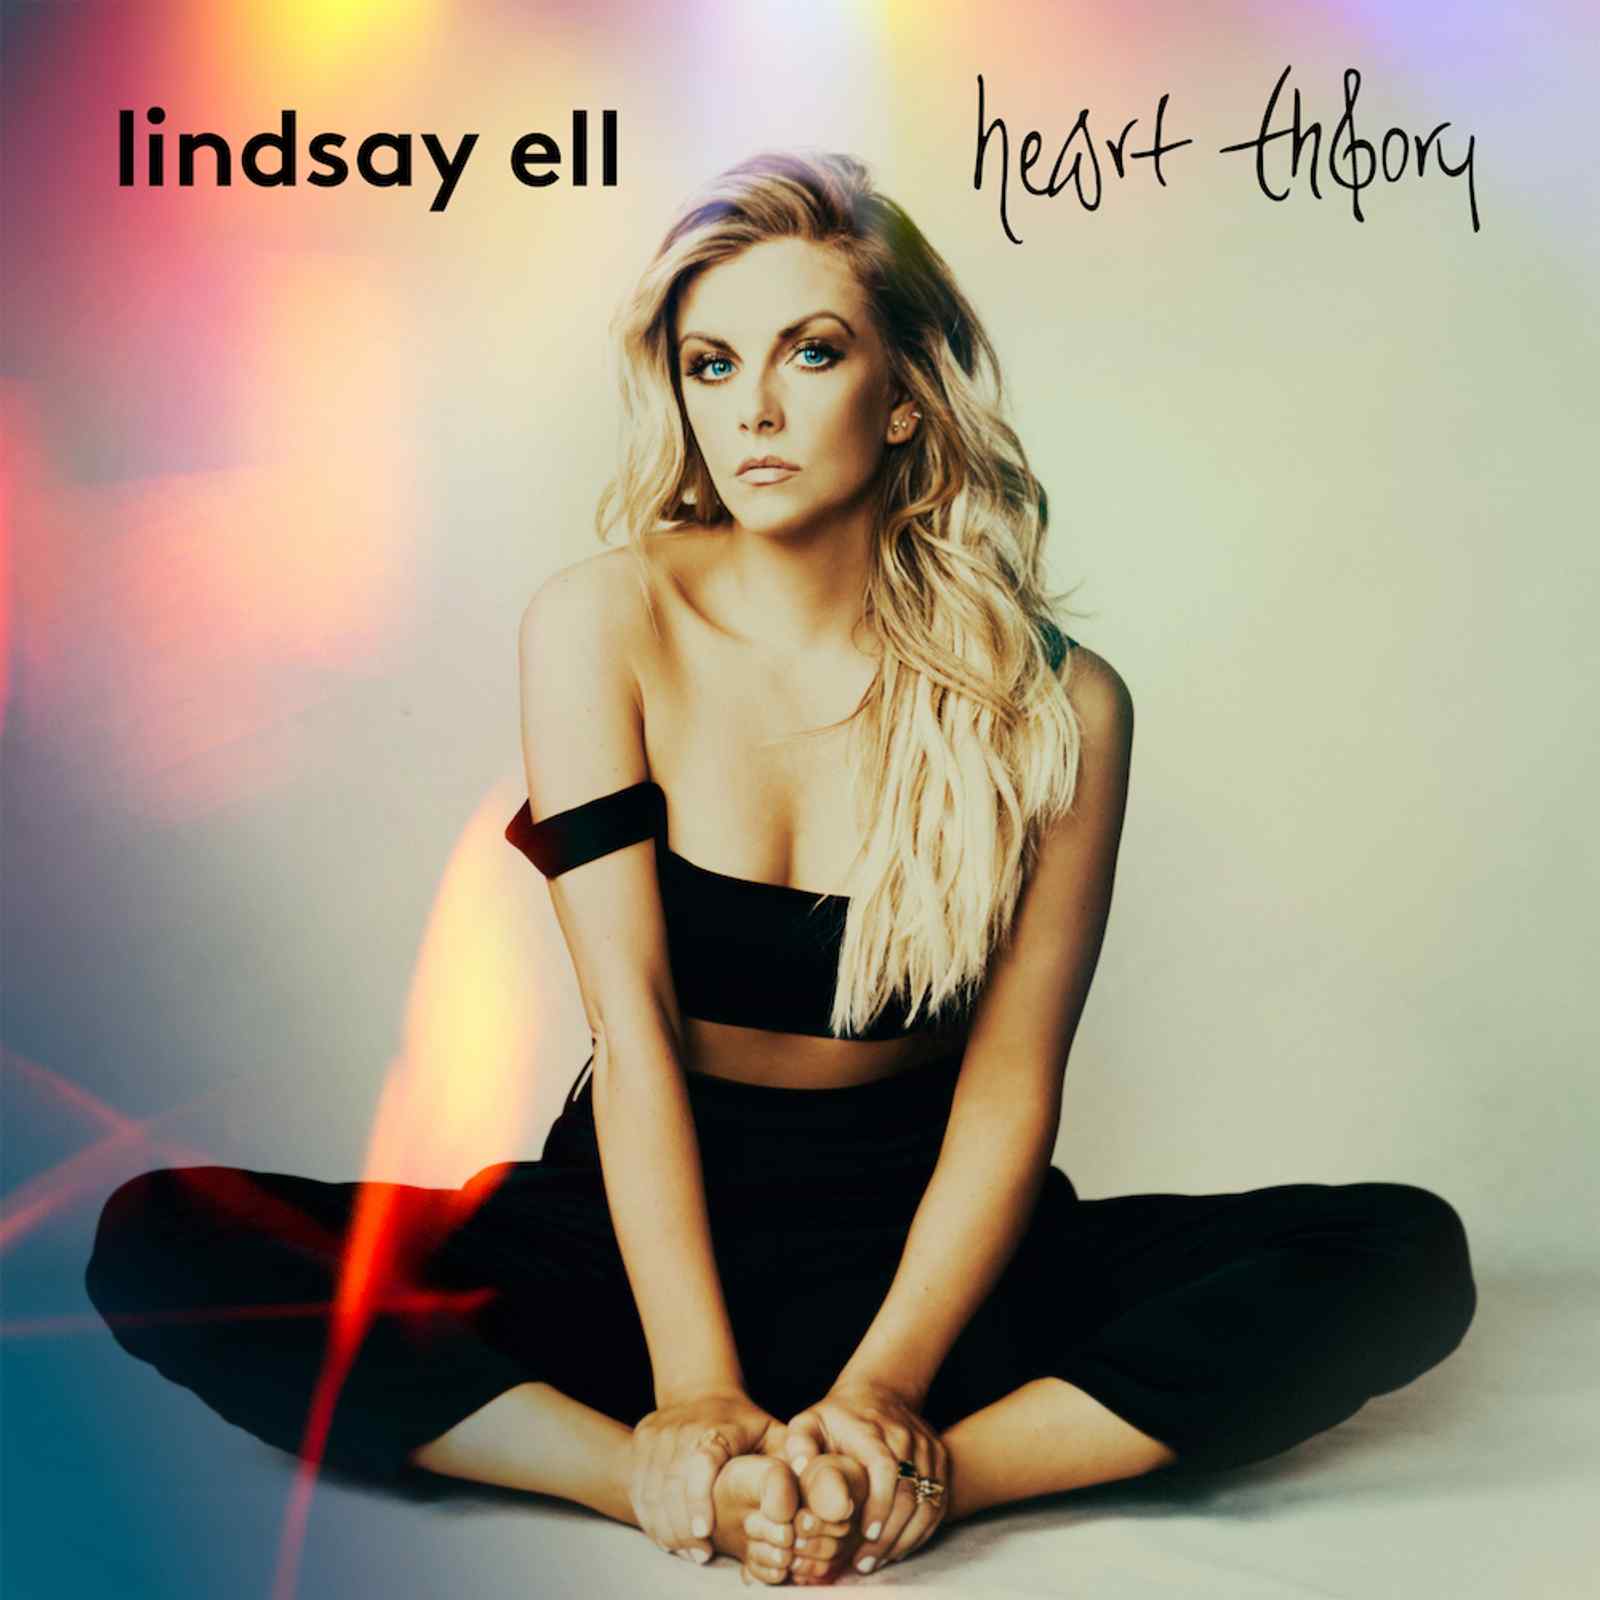 heart theory by Lindsay Ell